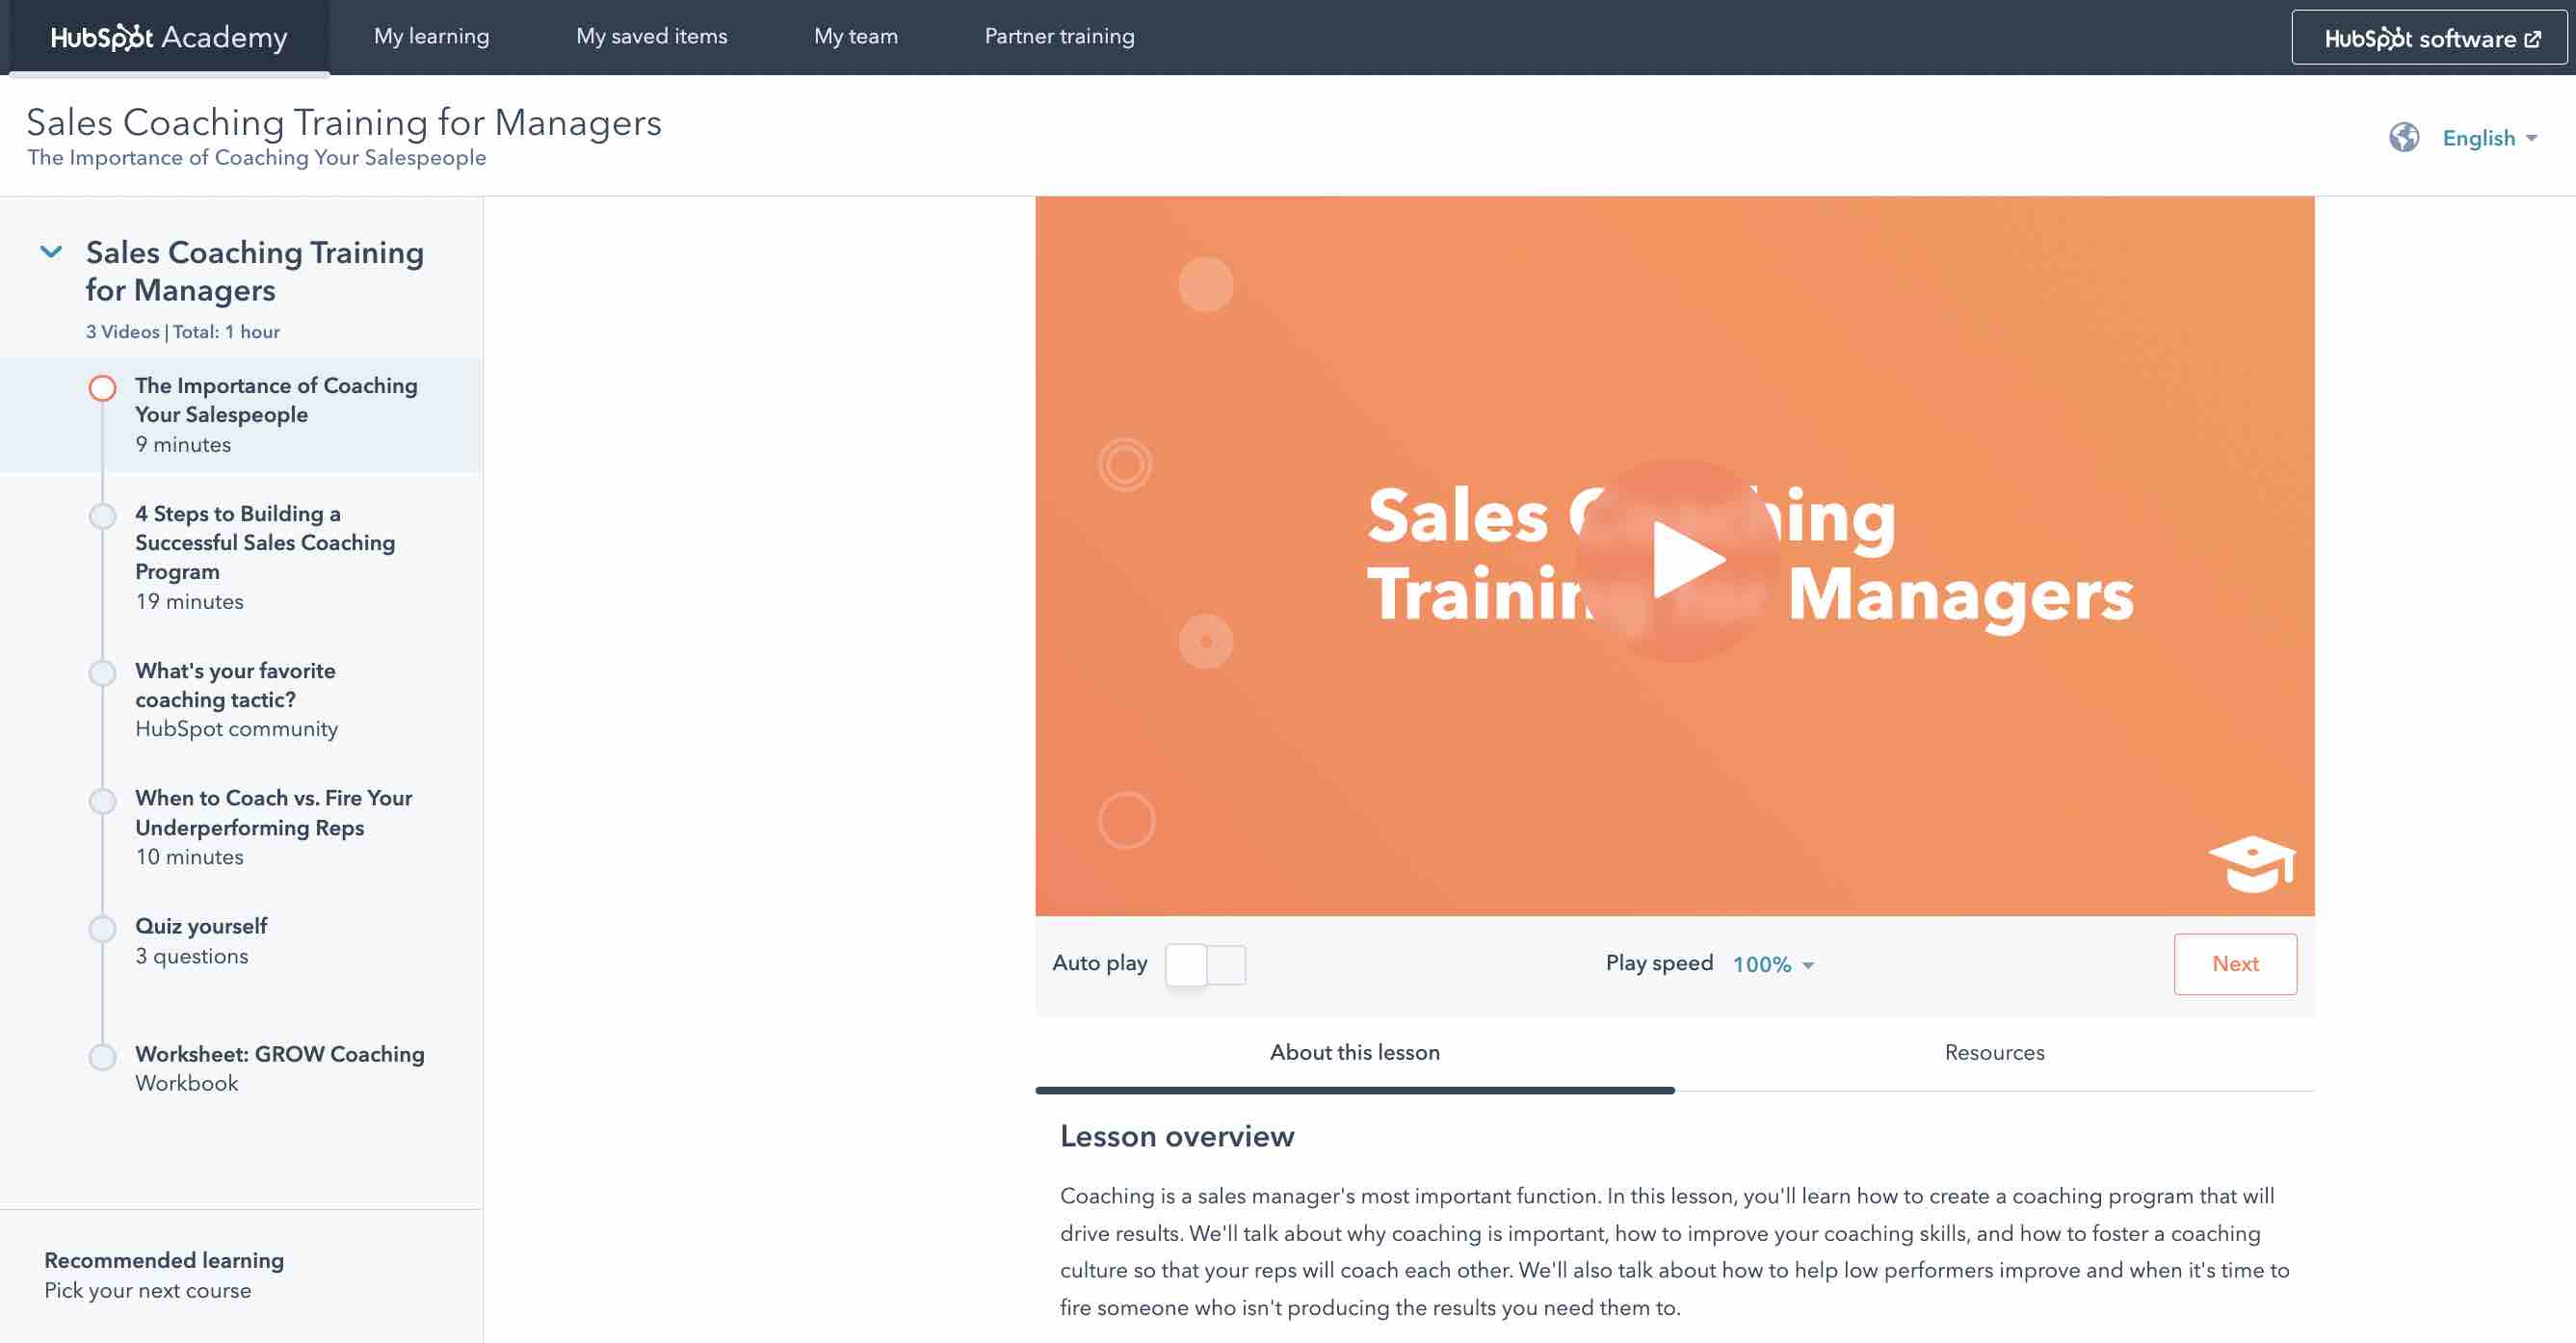 sales coaching best practices, HubSpot’s sales coaching training for managers.